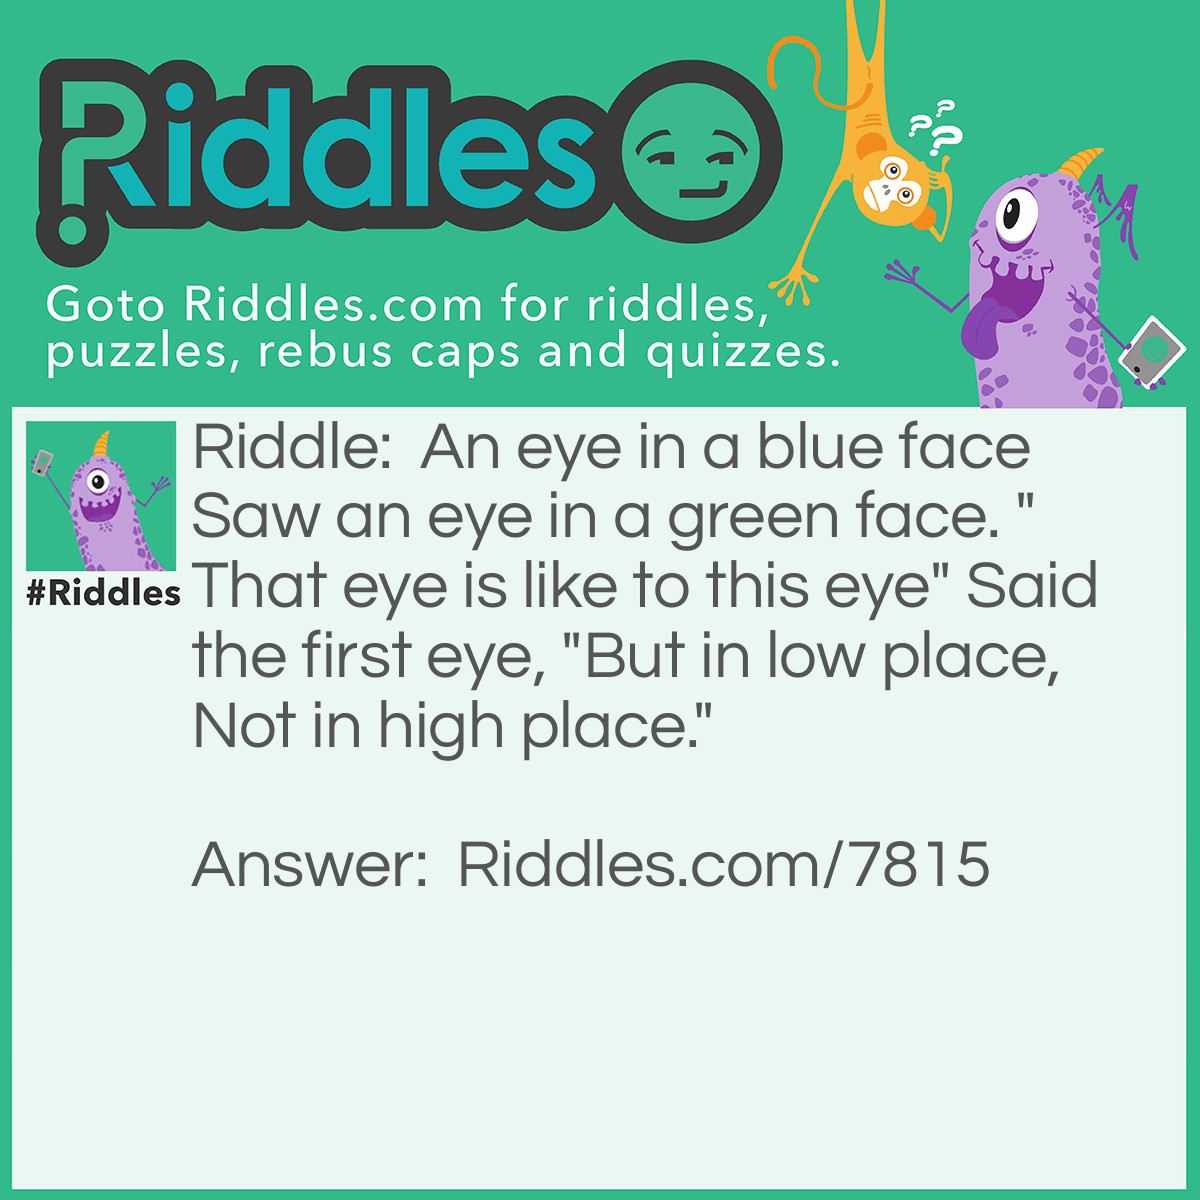 Riddle: An eye in a blue face Saw an eye in a green face. "That eye is like to this eye" Said the first eye, "But in low place, Not in high place." Answer: Sun on the dasies